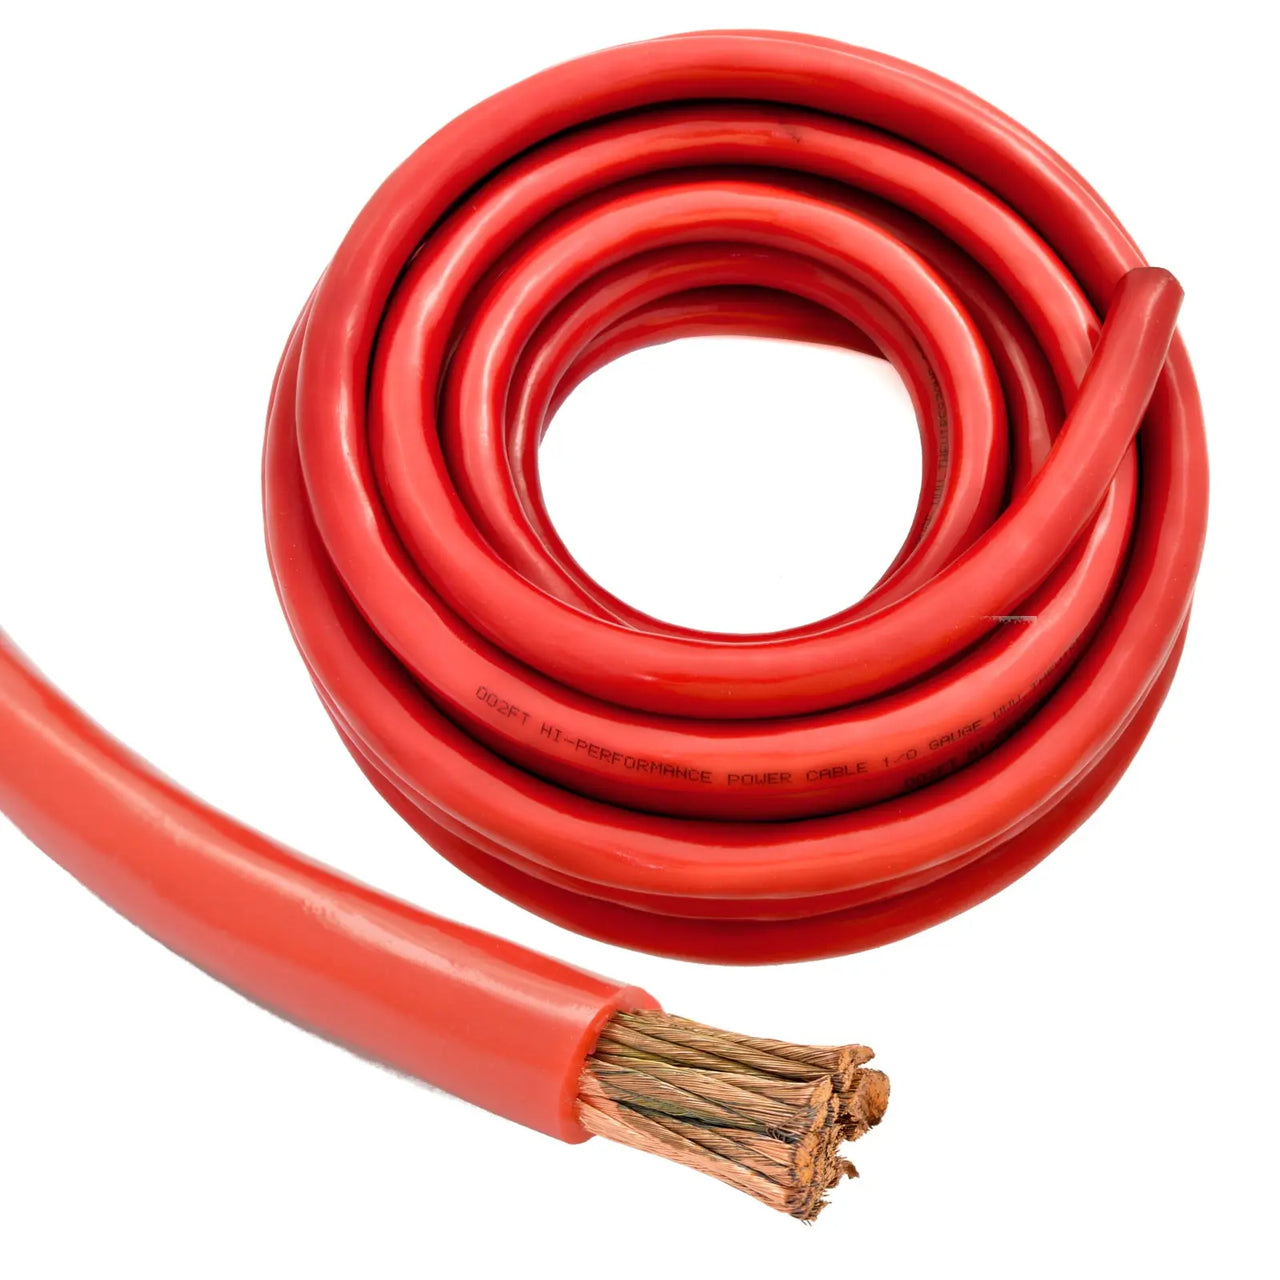 2 XP Audio SPW-0-50RD 1/0 Gauge 50 FT (100 Feet Total) Xtreme Twisted Power/Ground Battery Wire Cables Set Red